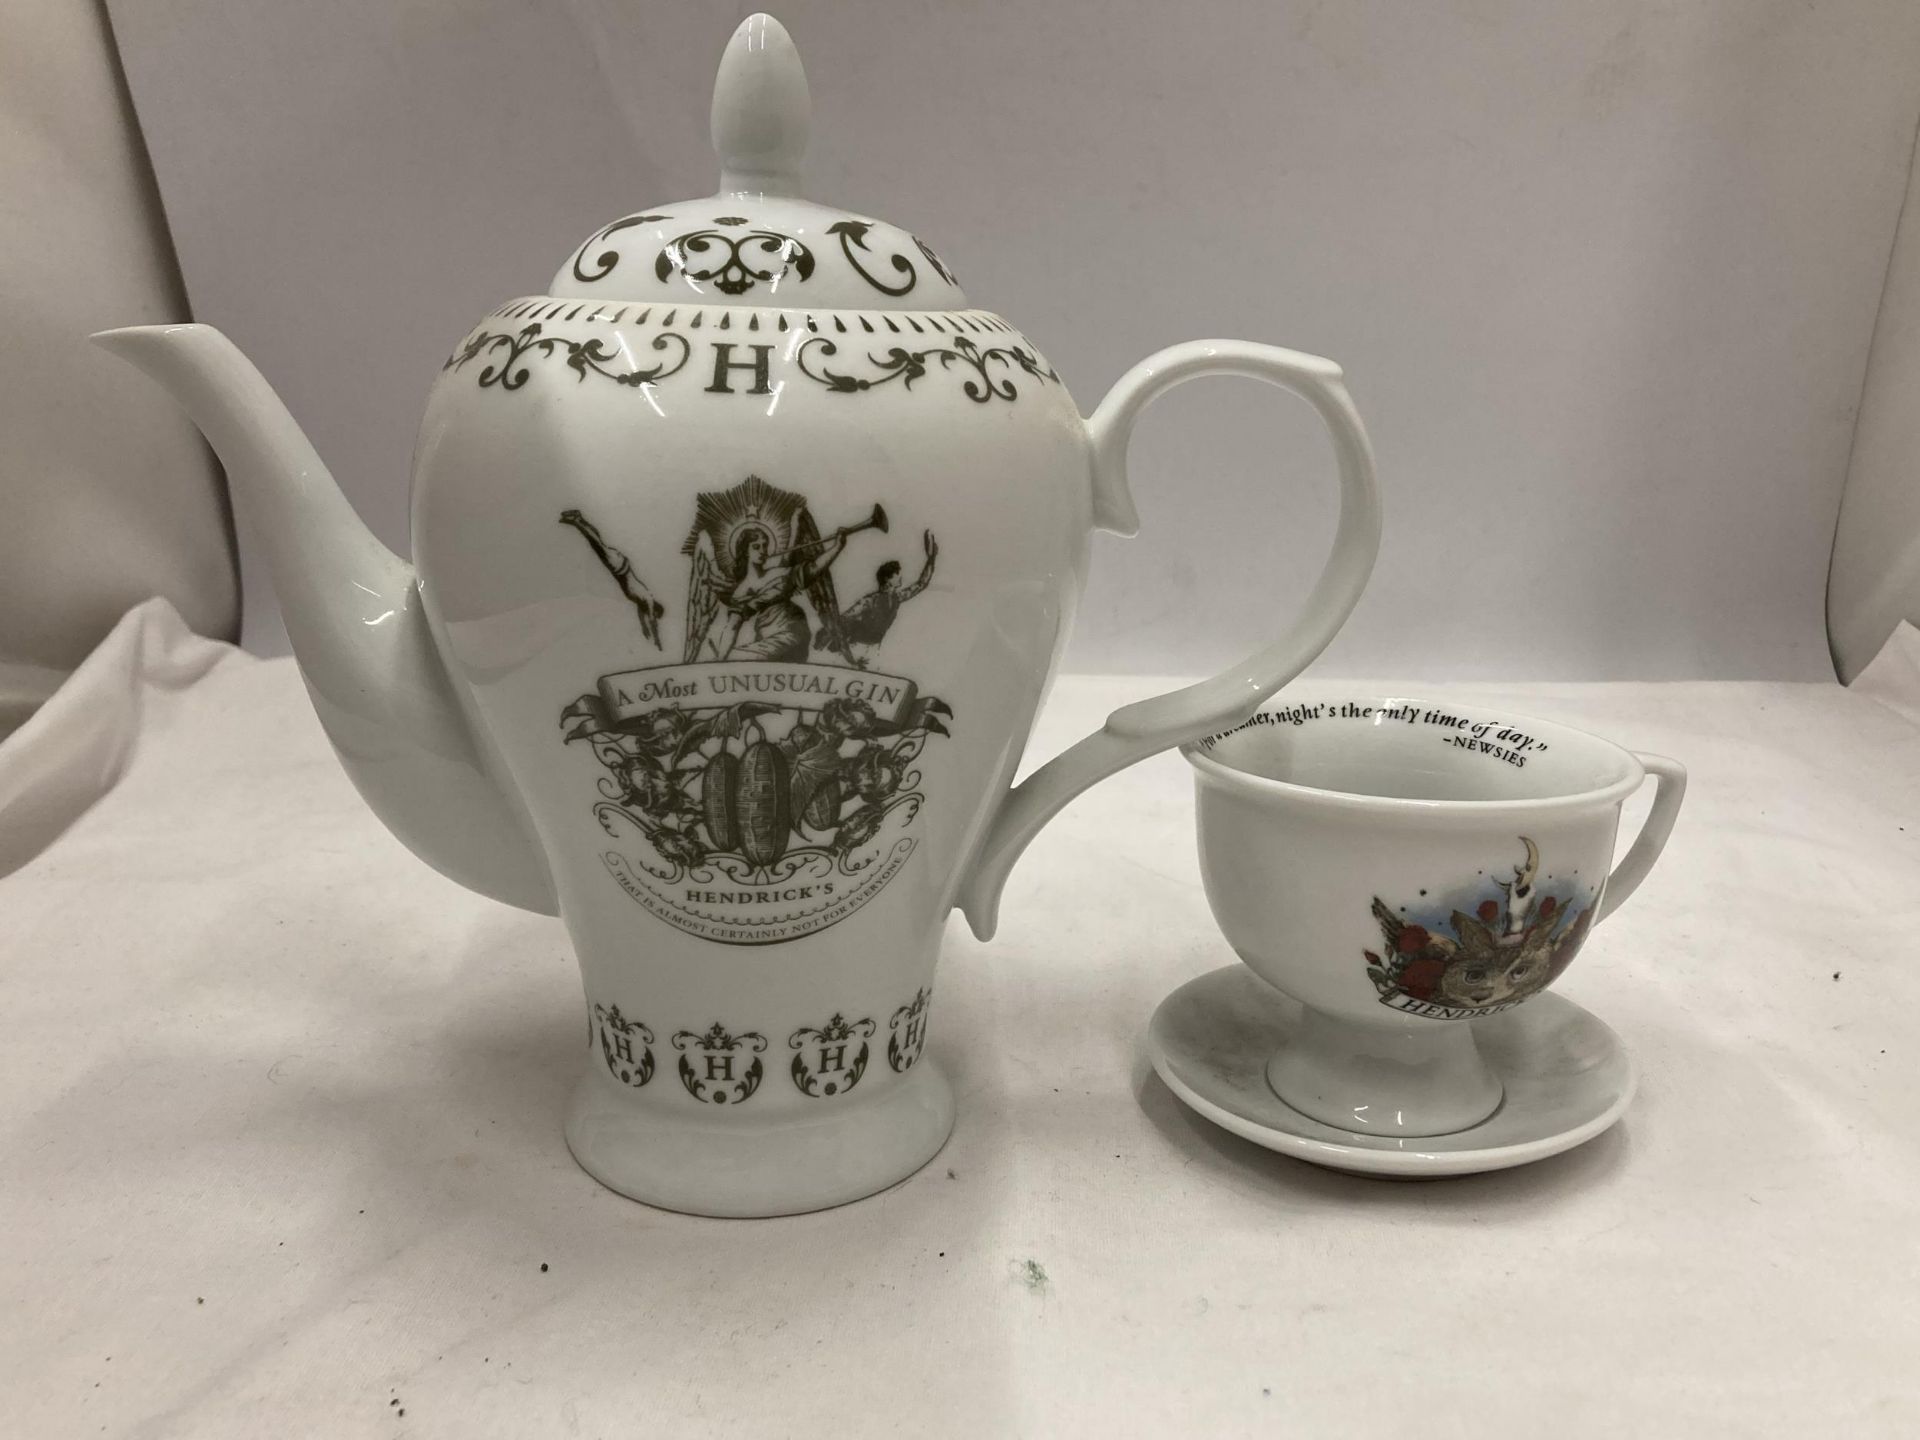 A HENDRICKS TEAPOT AND CUP AND SAUCER